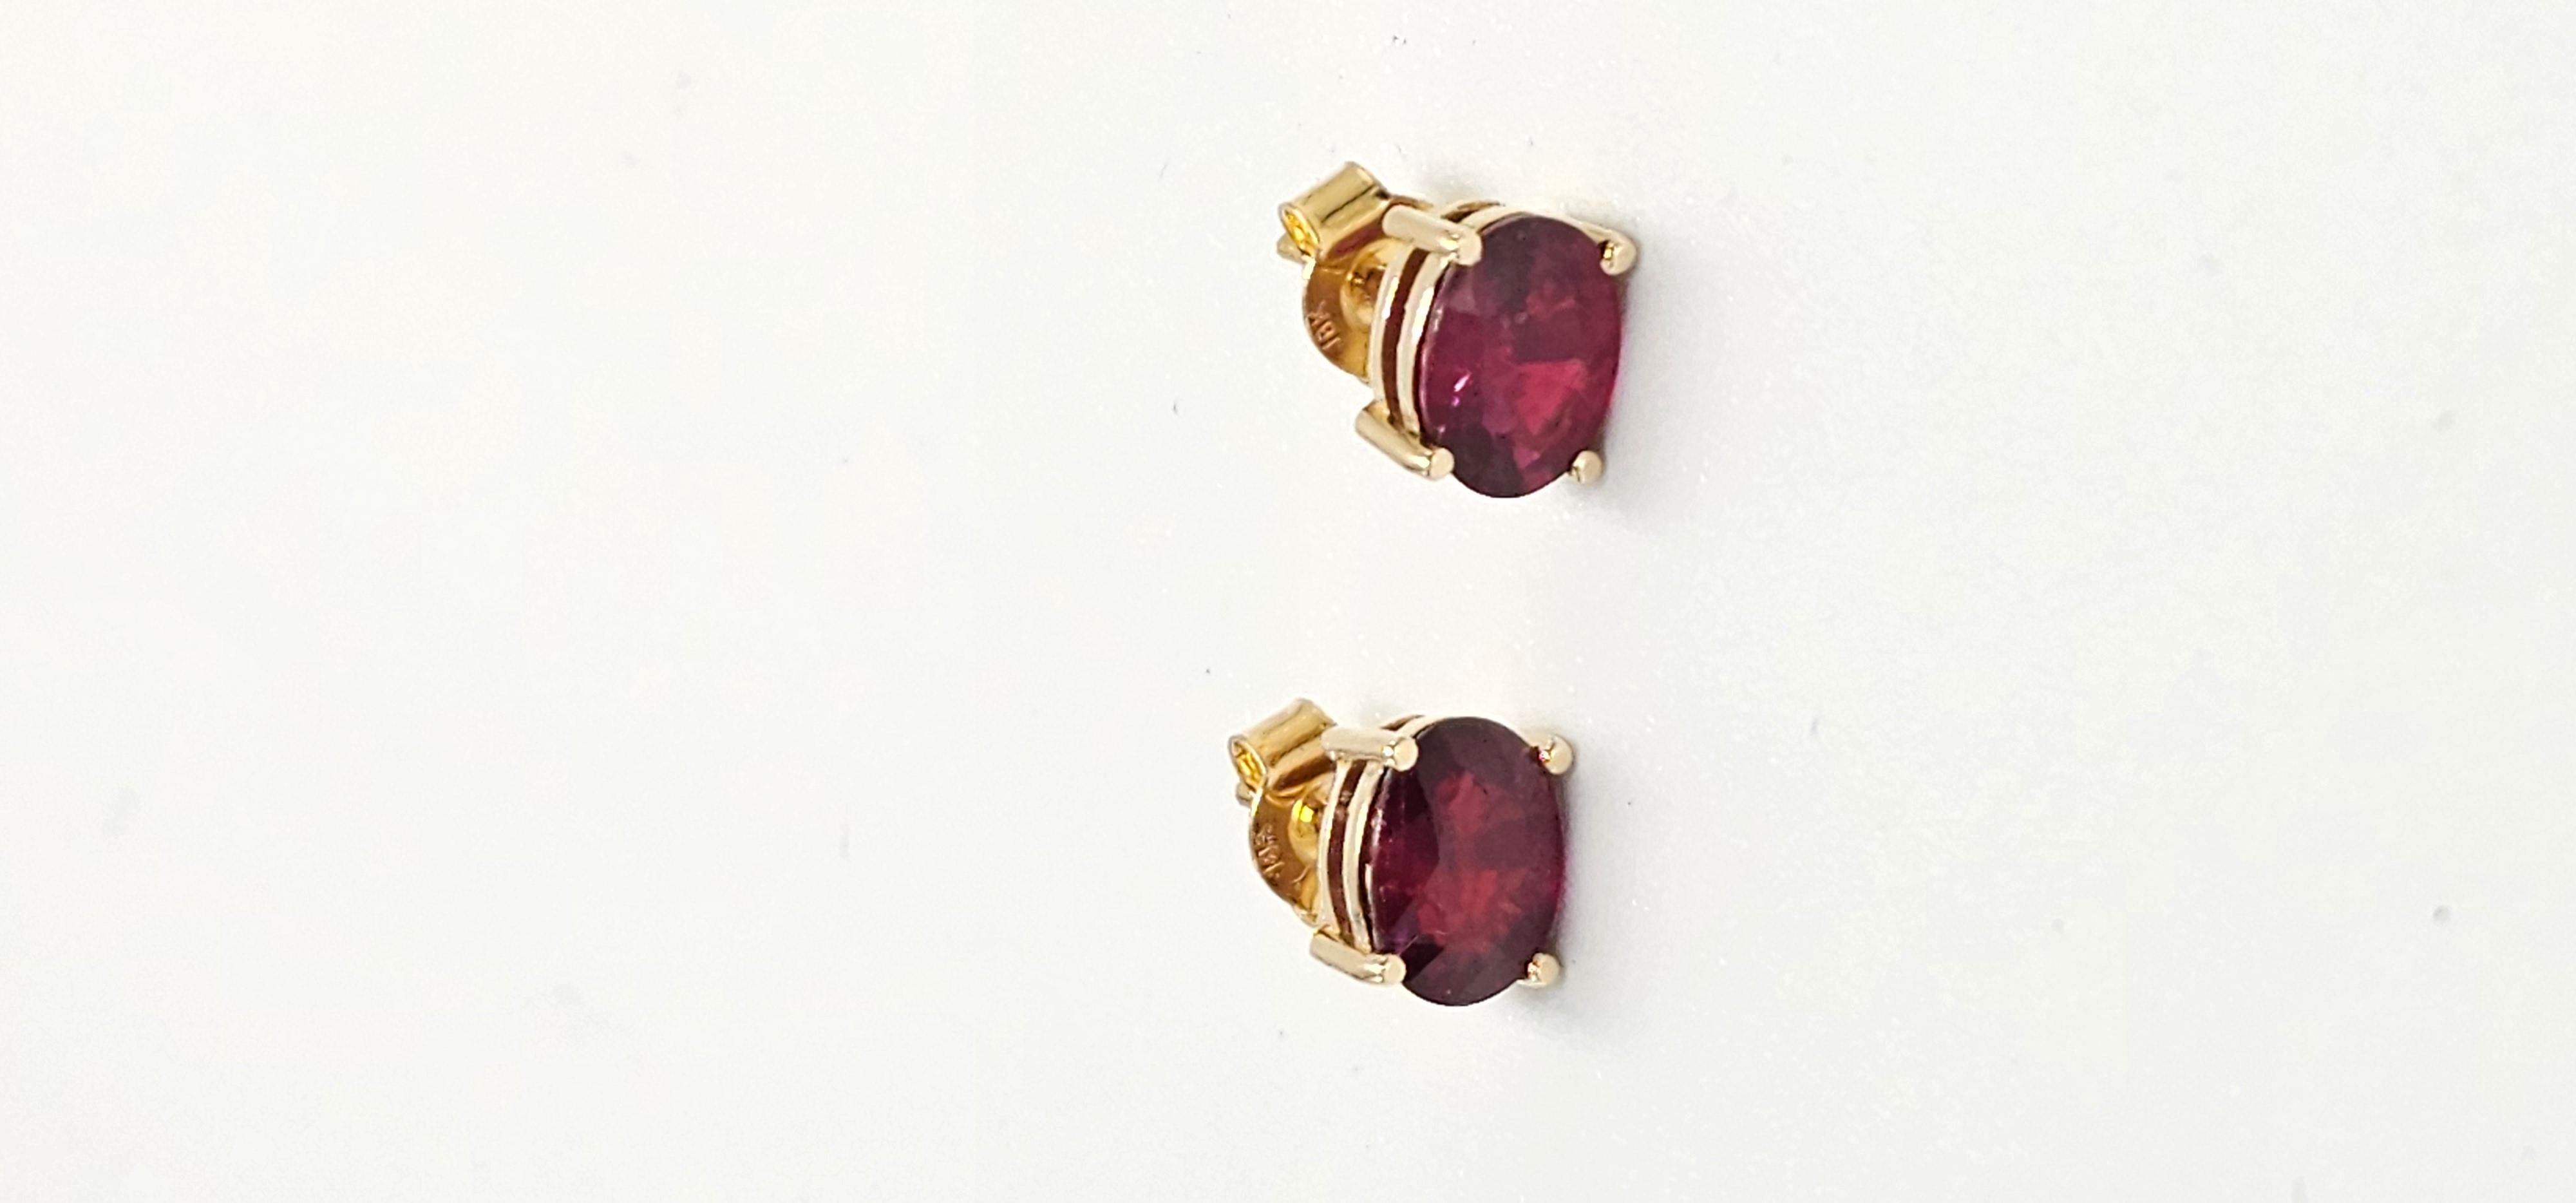  A stunning pair of Pigeon Blood Red Rubies, the most sort after color in Ruby, set in 18k yellow gold. This is a beautiful and amazing piece with vivid color, set in a custom designed earring to enhance the natural beauty!
 Ruby : 1.39 & 1.61 